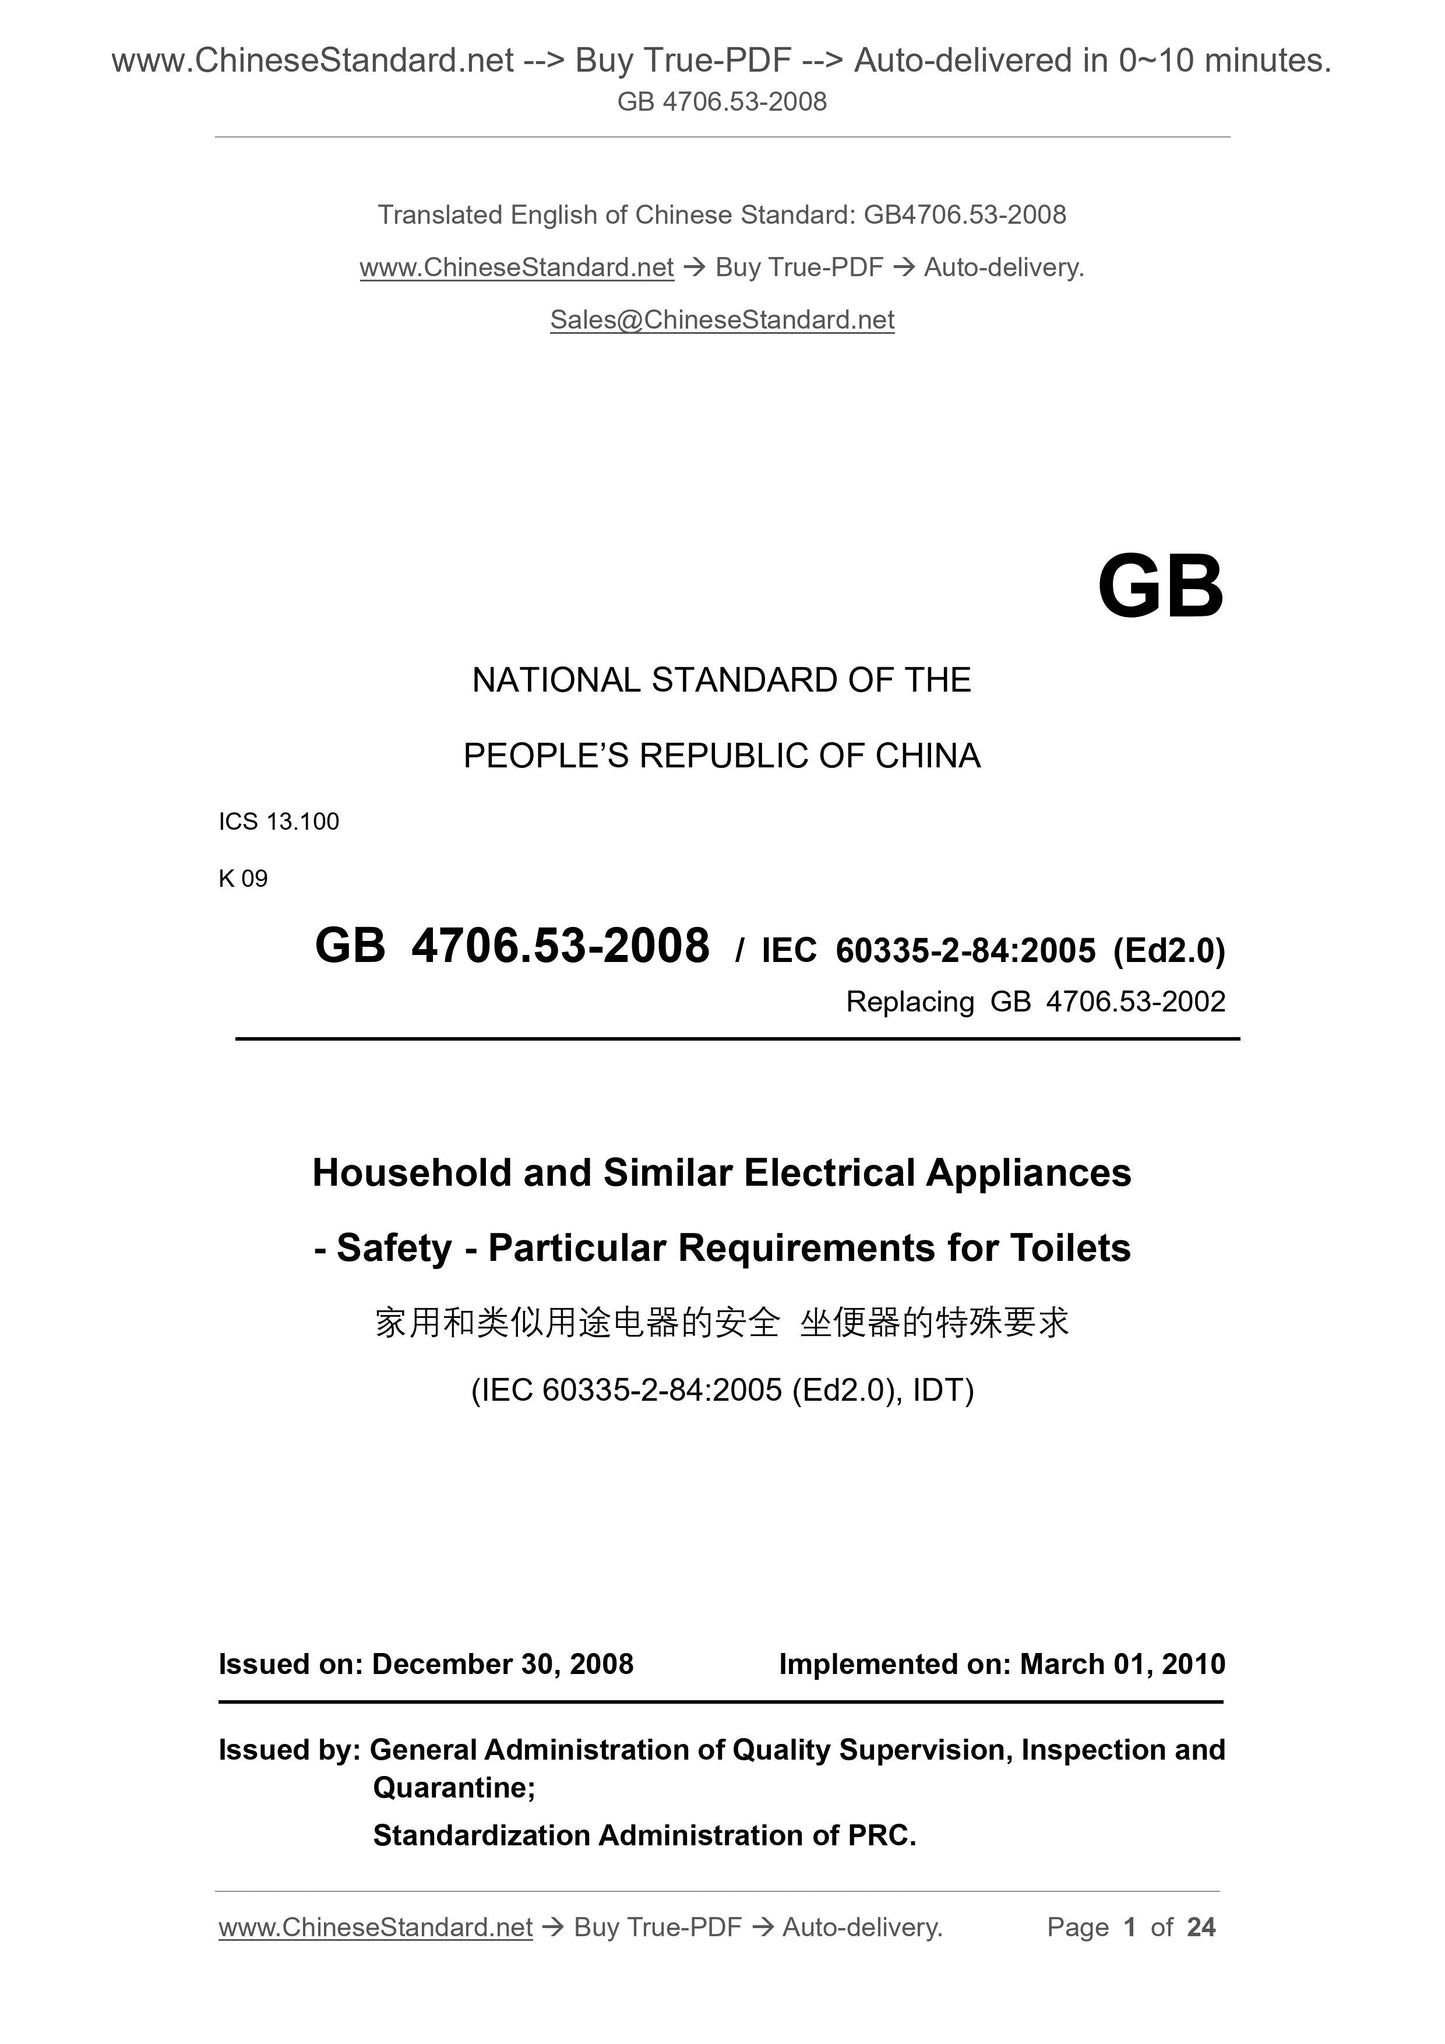 GB 4706.53-2008 Page 1